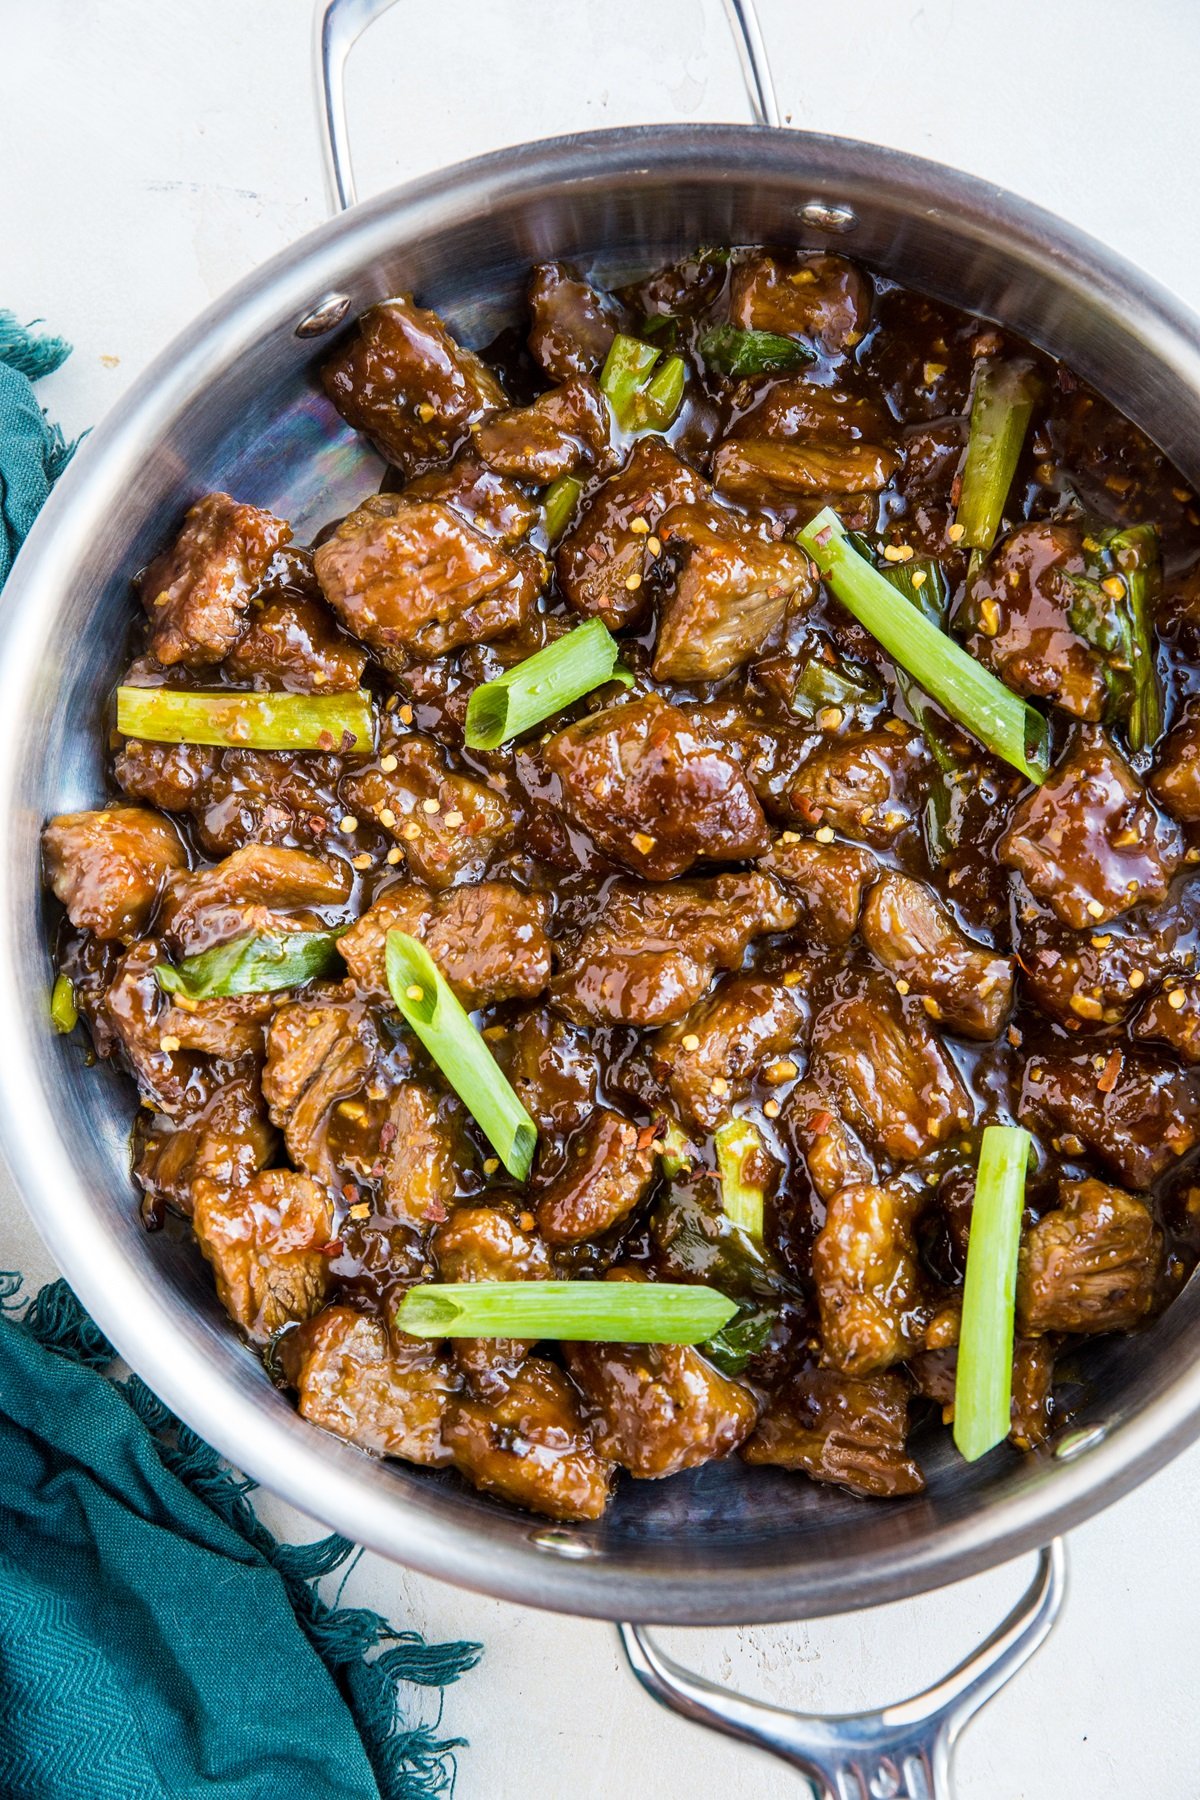 Stainless steel skillet full of healthy Mongolian beef with green onions on top and a blue napkin to the side.